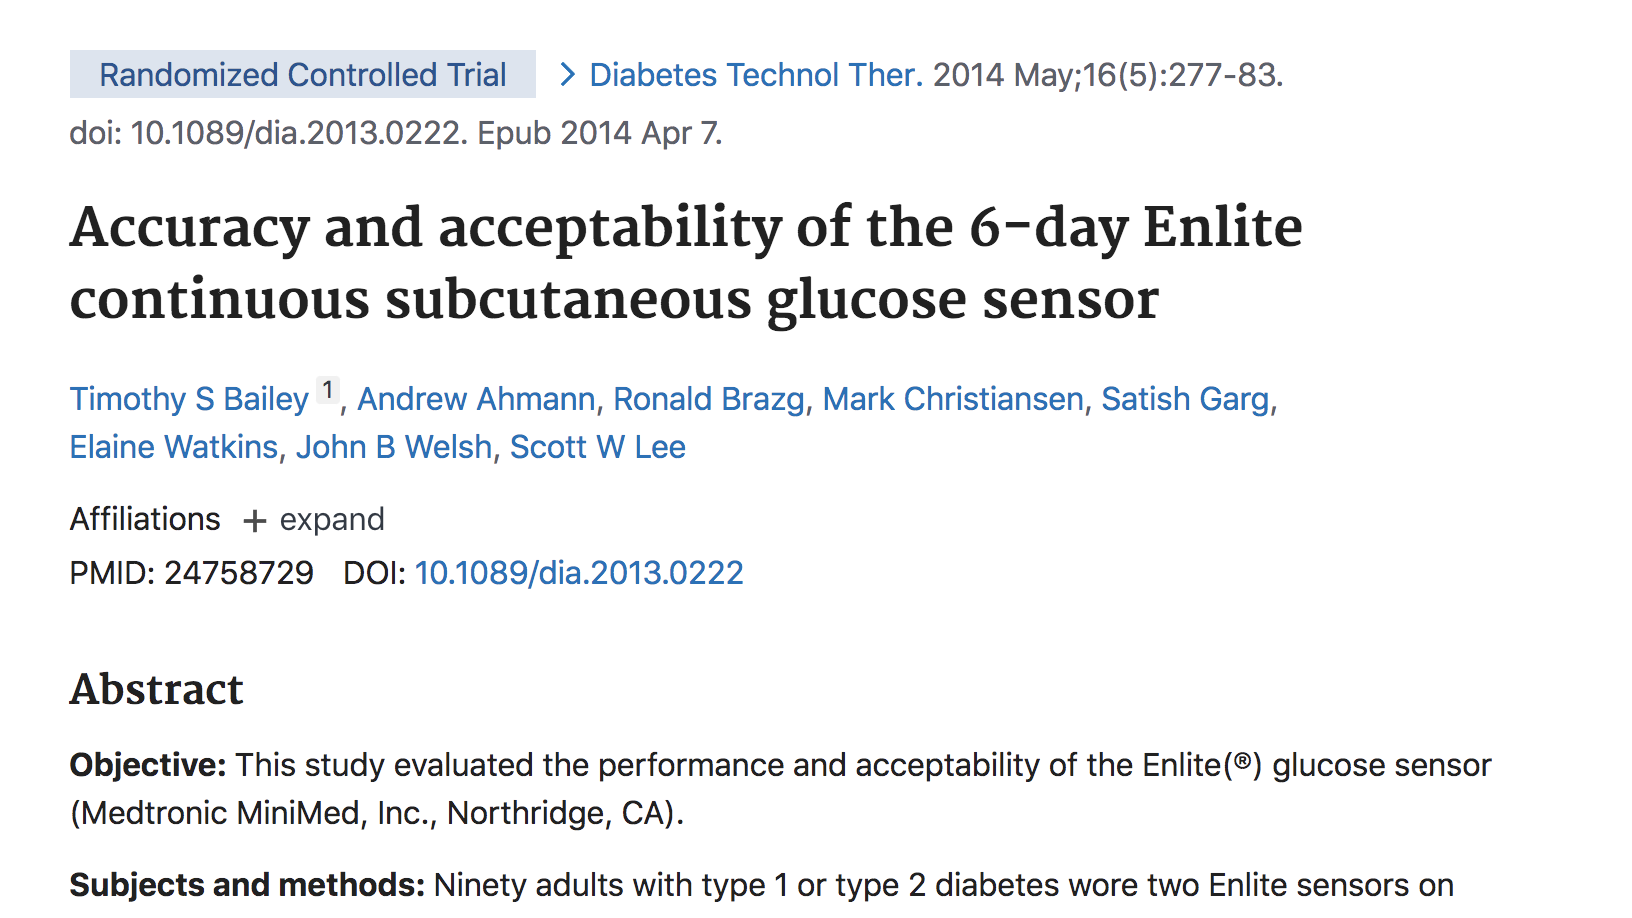 image of Accuracy and acceptability of the 6-day Enlite continuous subcutaneous glucose sensor.